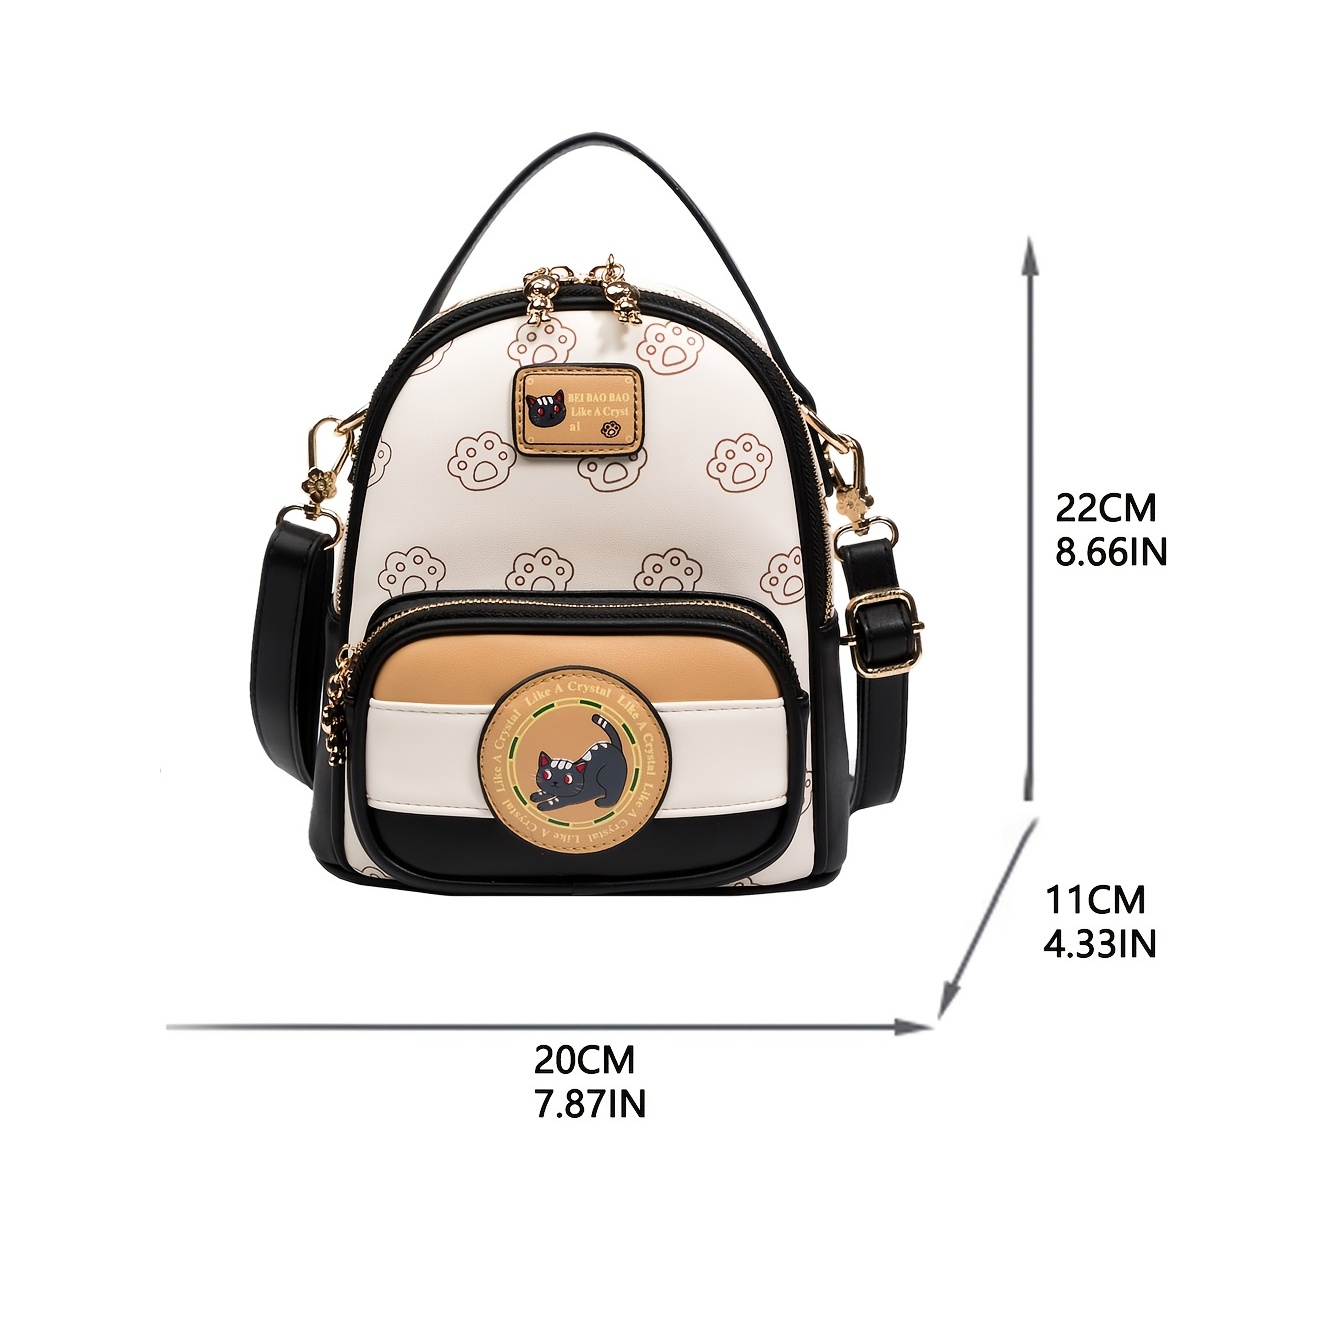 NON BRAND Pu Leather BAO BAO SLING SMALL BAG FOR LADIES, For